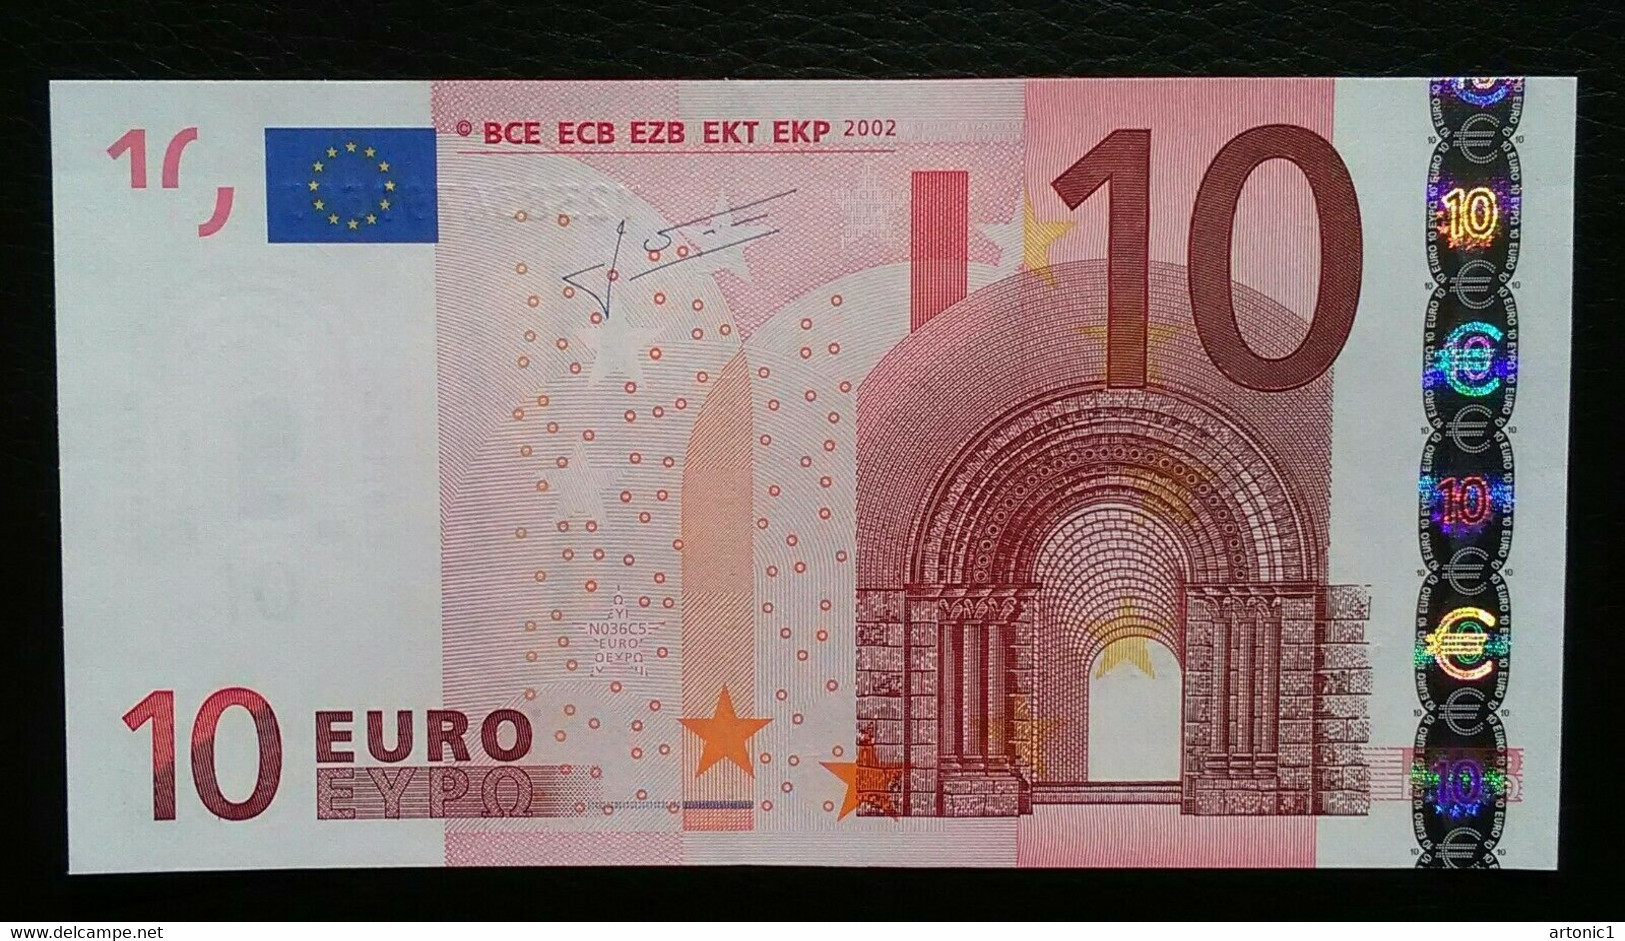 Check For 10€ Euro Banknotes With 2002 Date? 